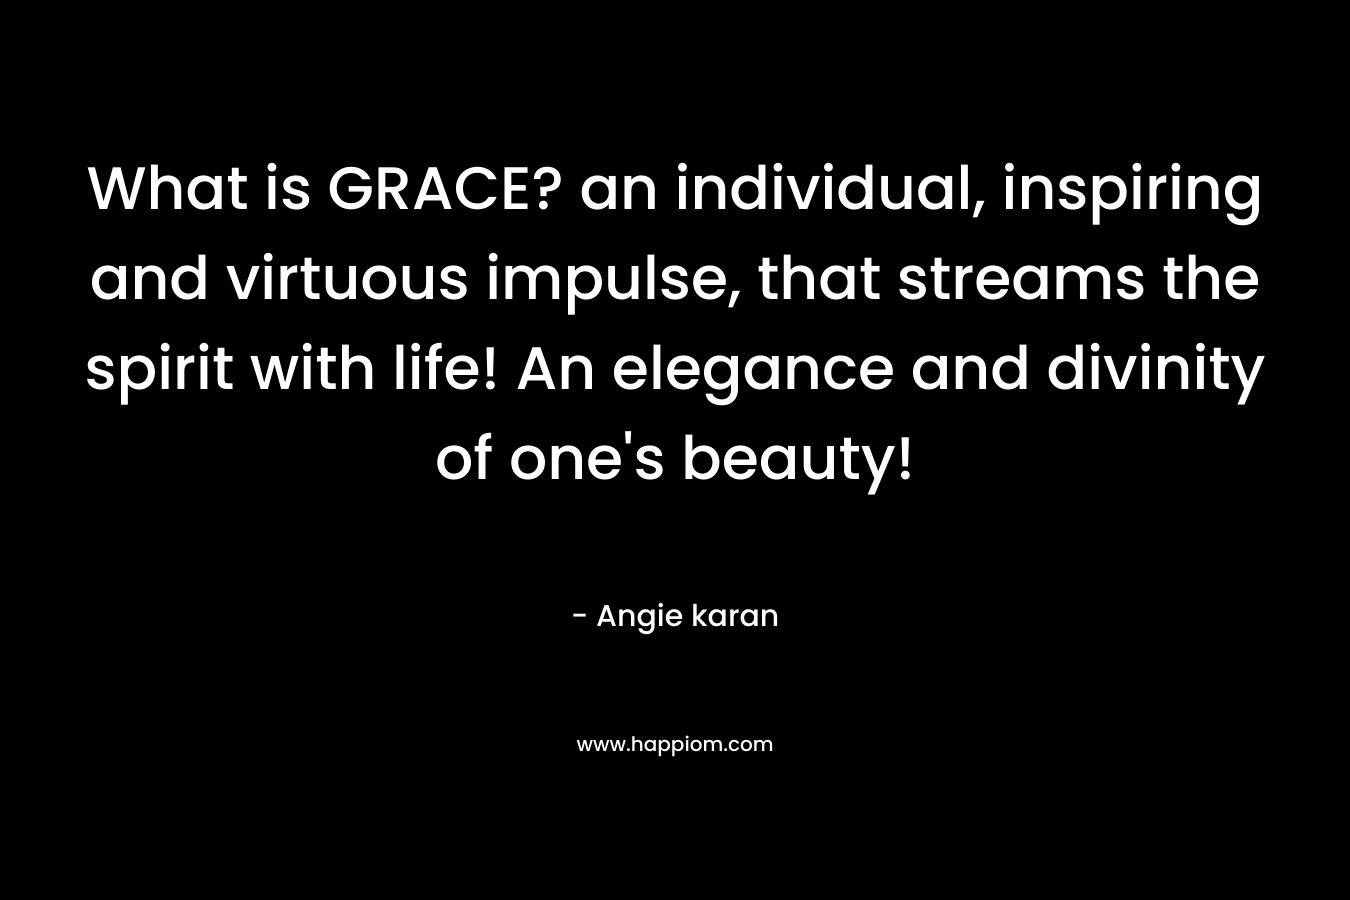 What is GRACE? an individual, inspiring and virtuous impulse, that streams the spirit with life! An elegance and divinity of one’s beauty! – Angie karan